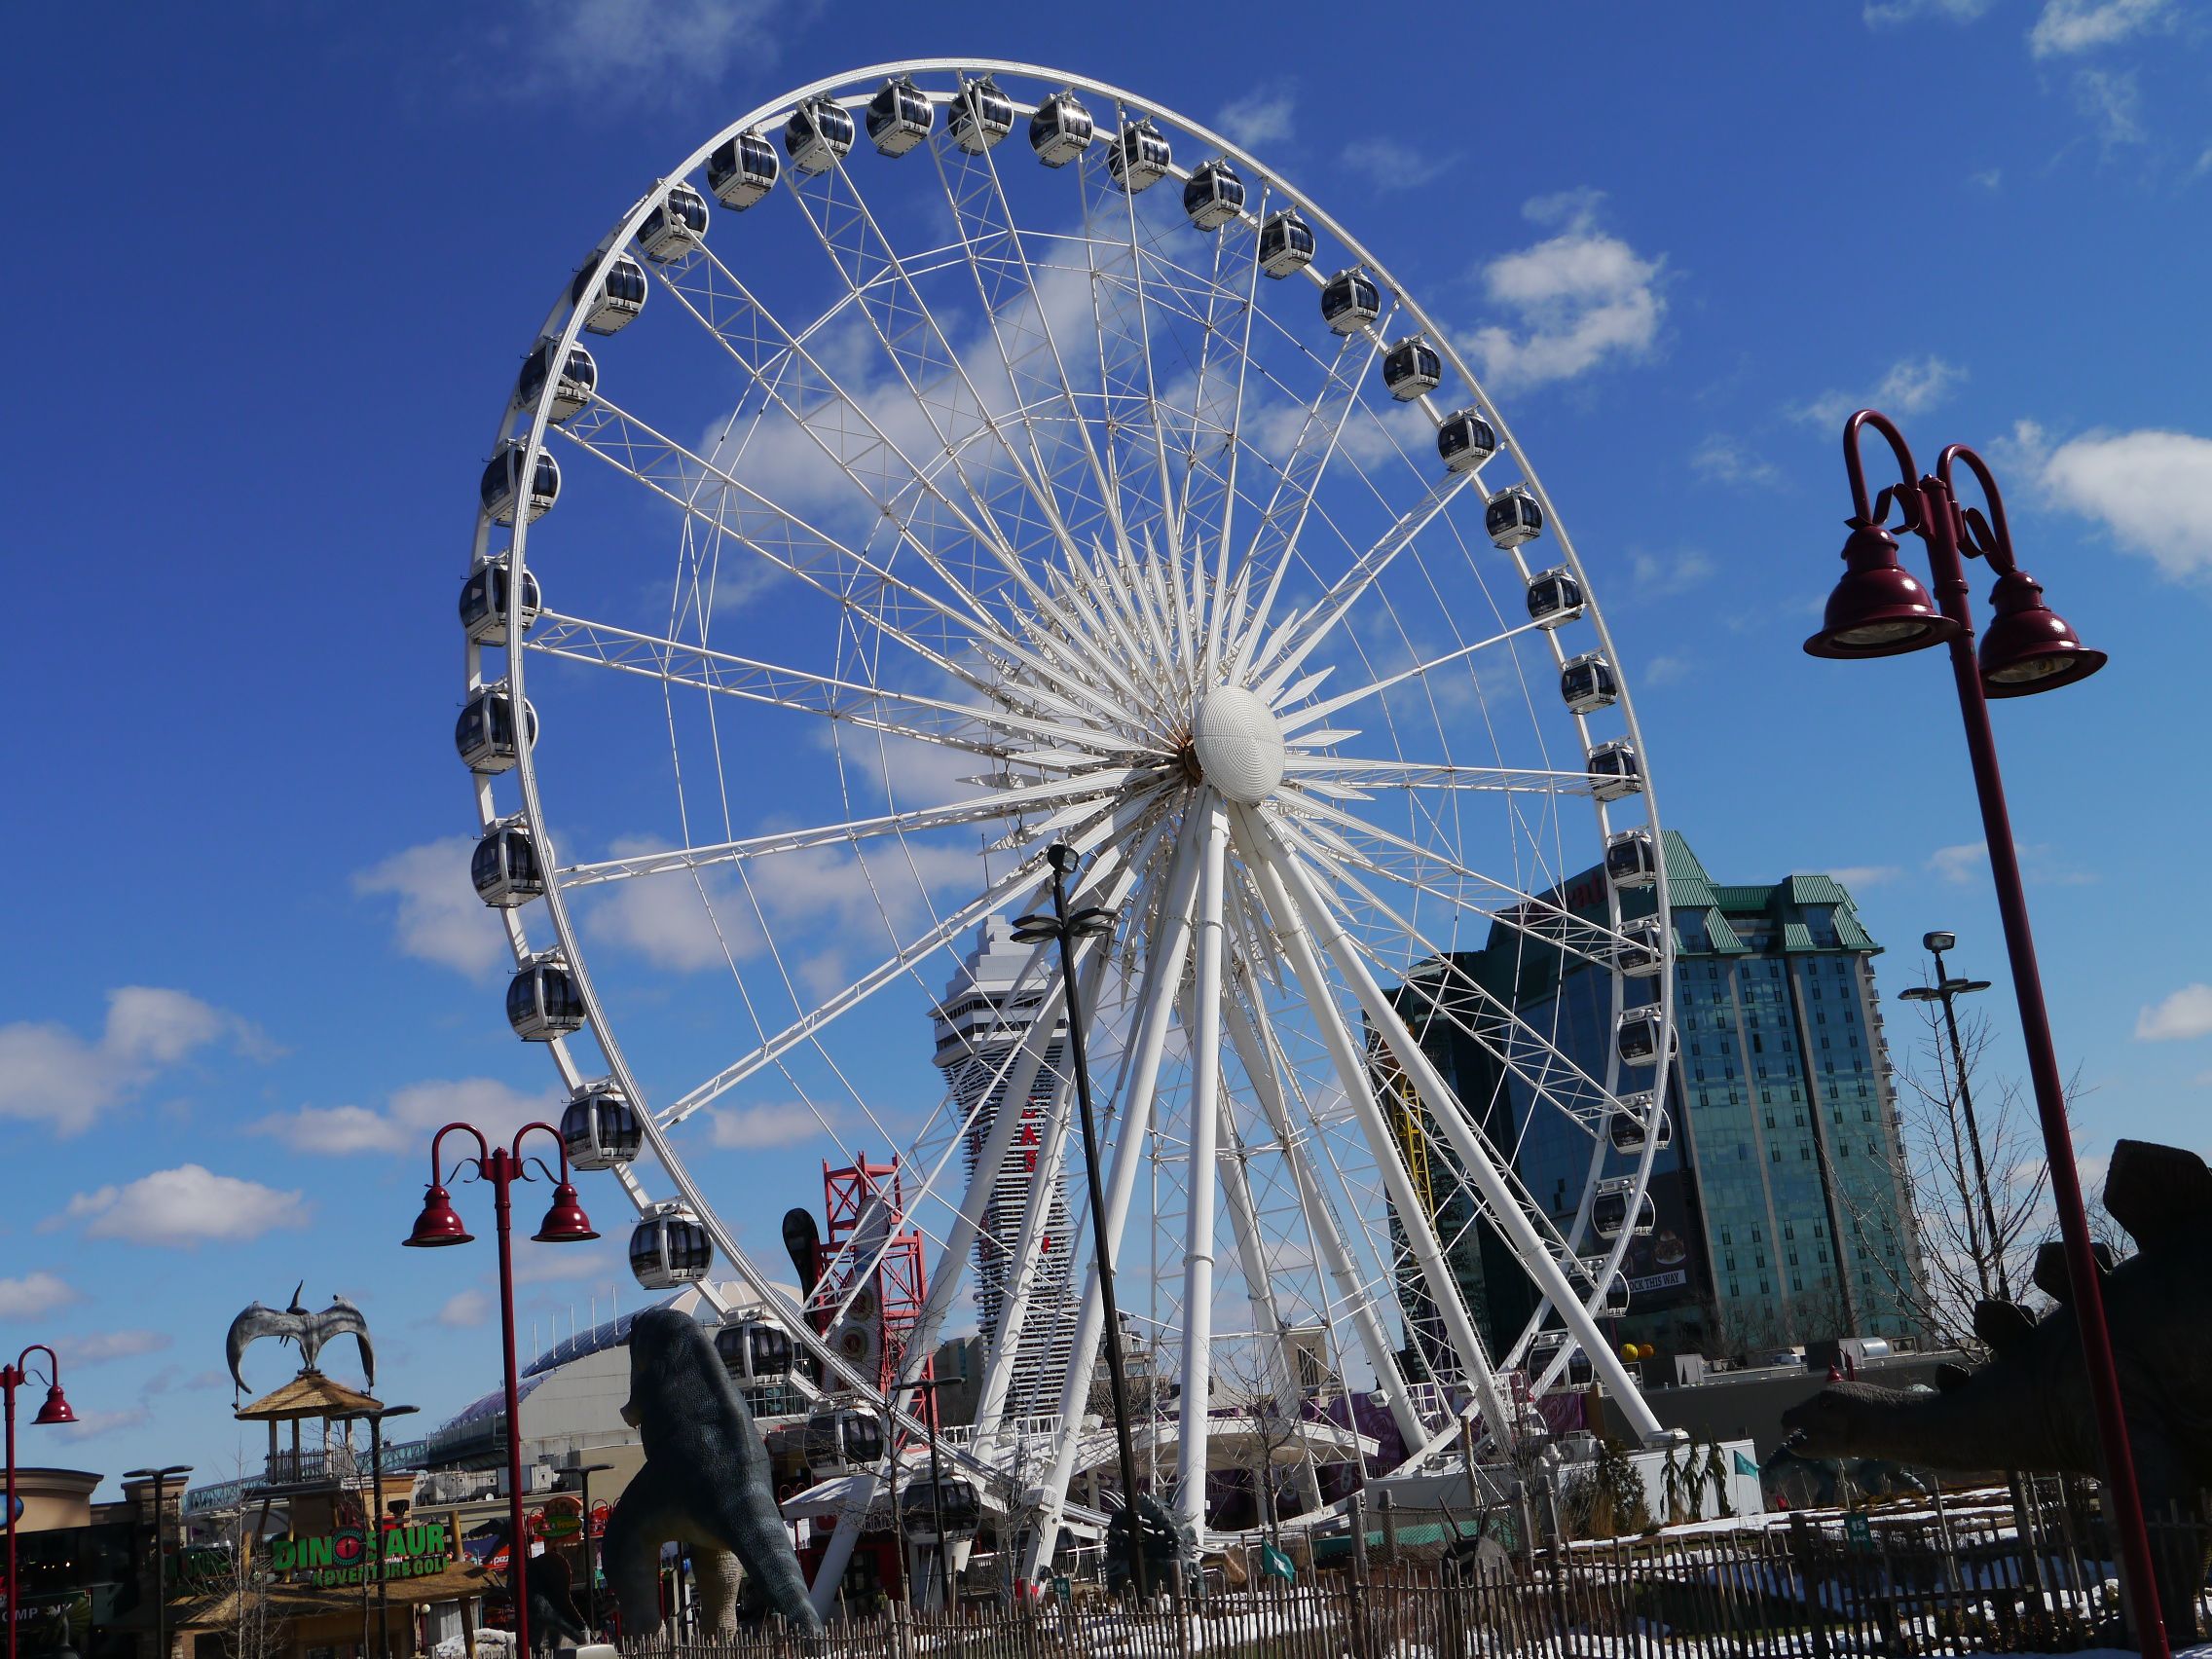 How much is the SkyWheel in Niagara Falls?